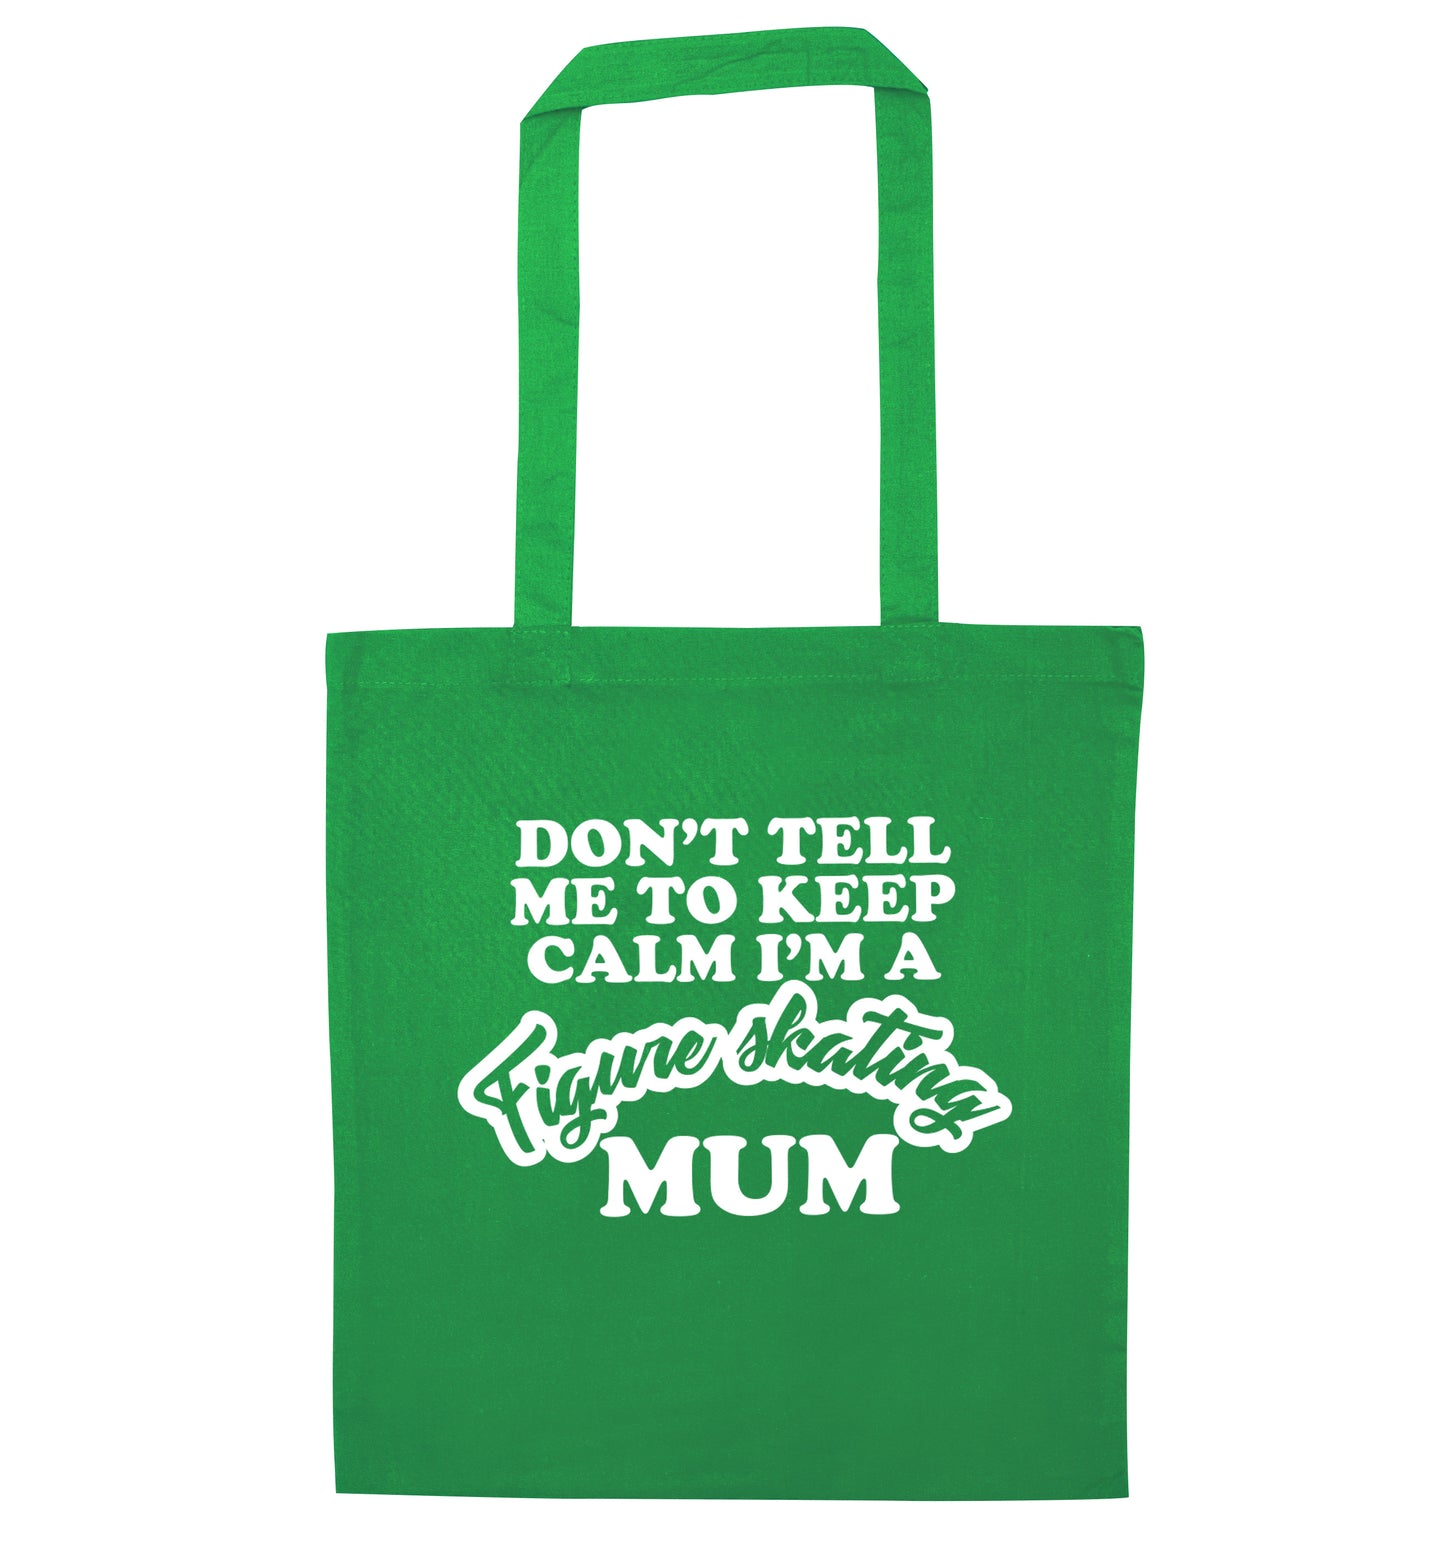 Don't tell me to keep calm I'm a figure skating mum green tote bag